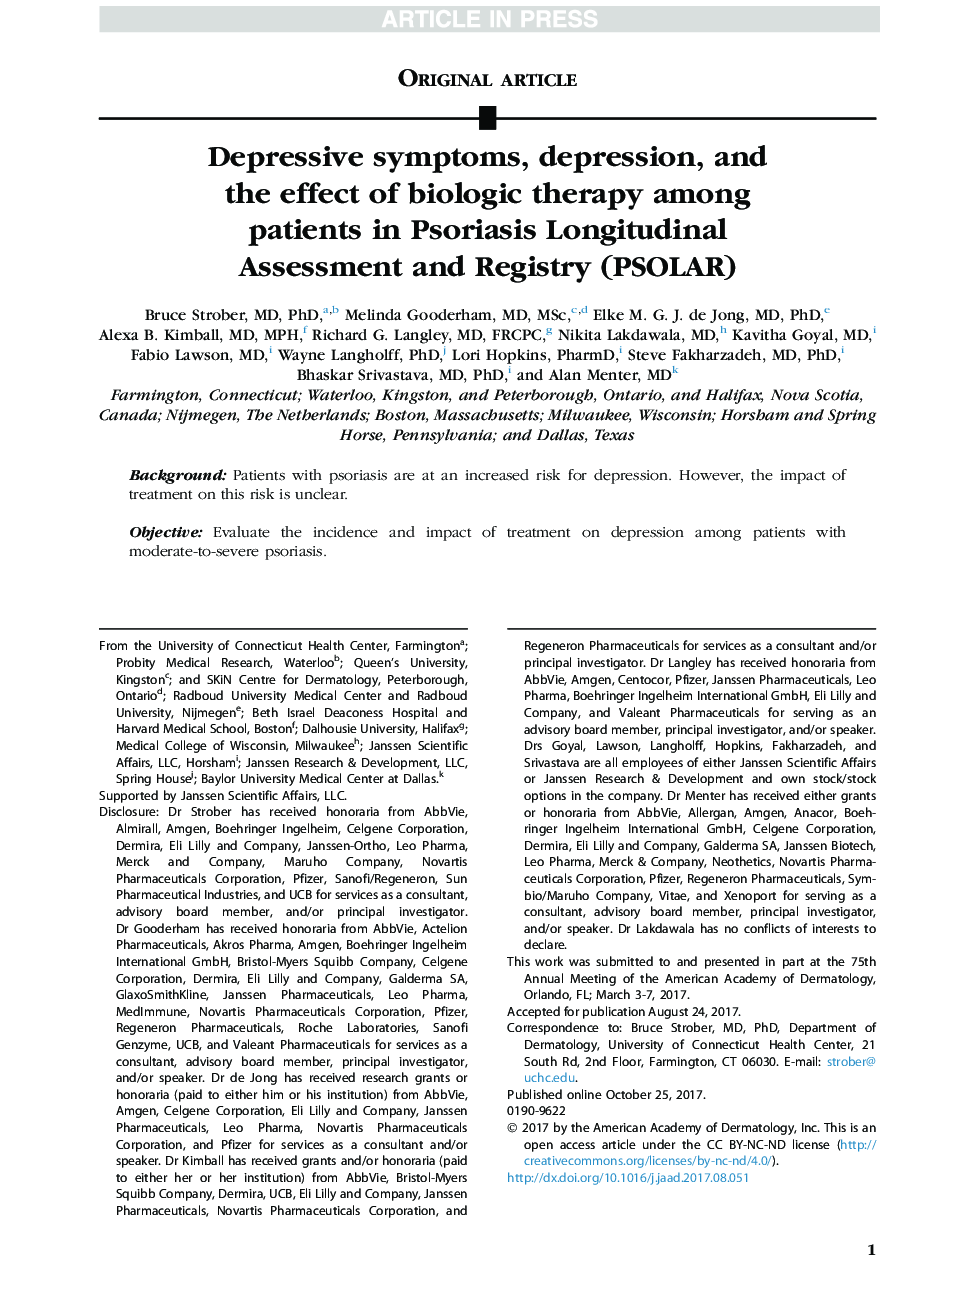 Depressive symptoms, depression, and the effect of biologic therapy among patients in Psoriasis Longitudinal Assessment and Registry (PSOLAR)